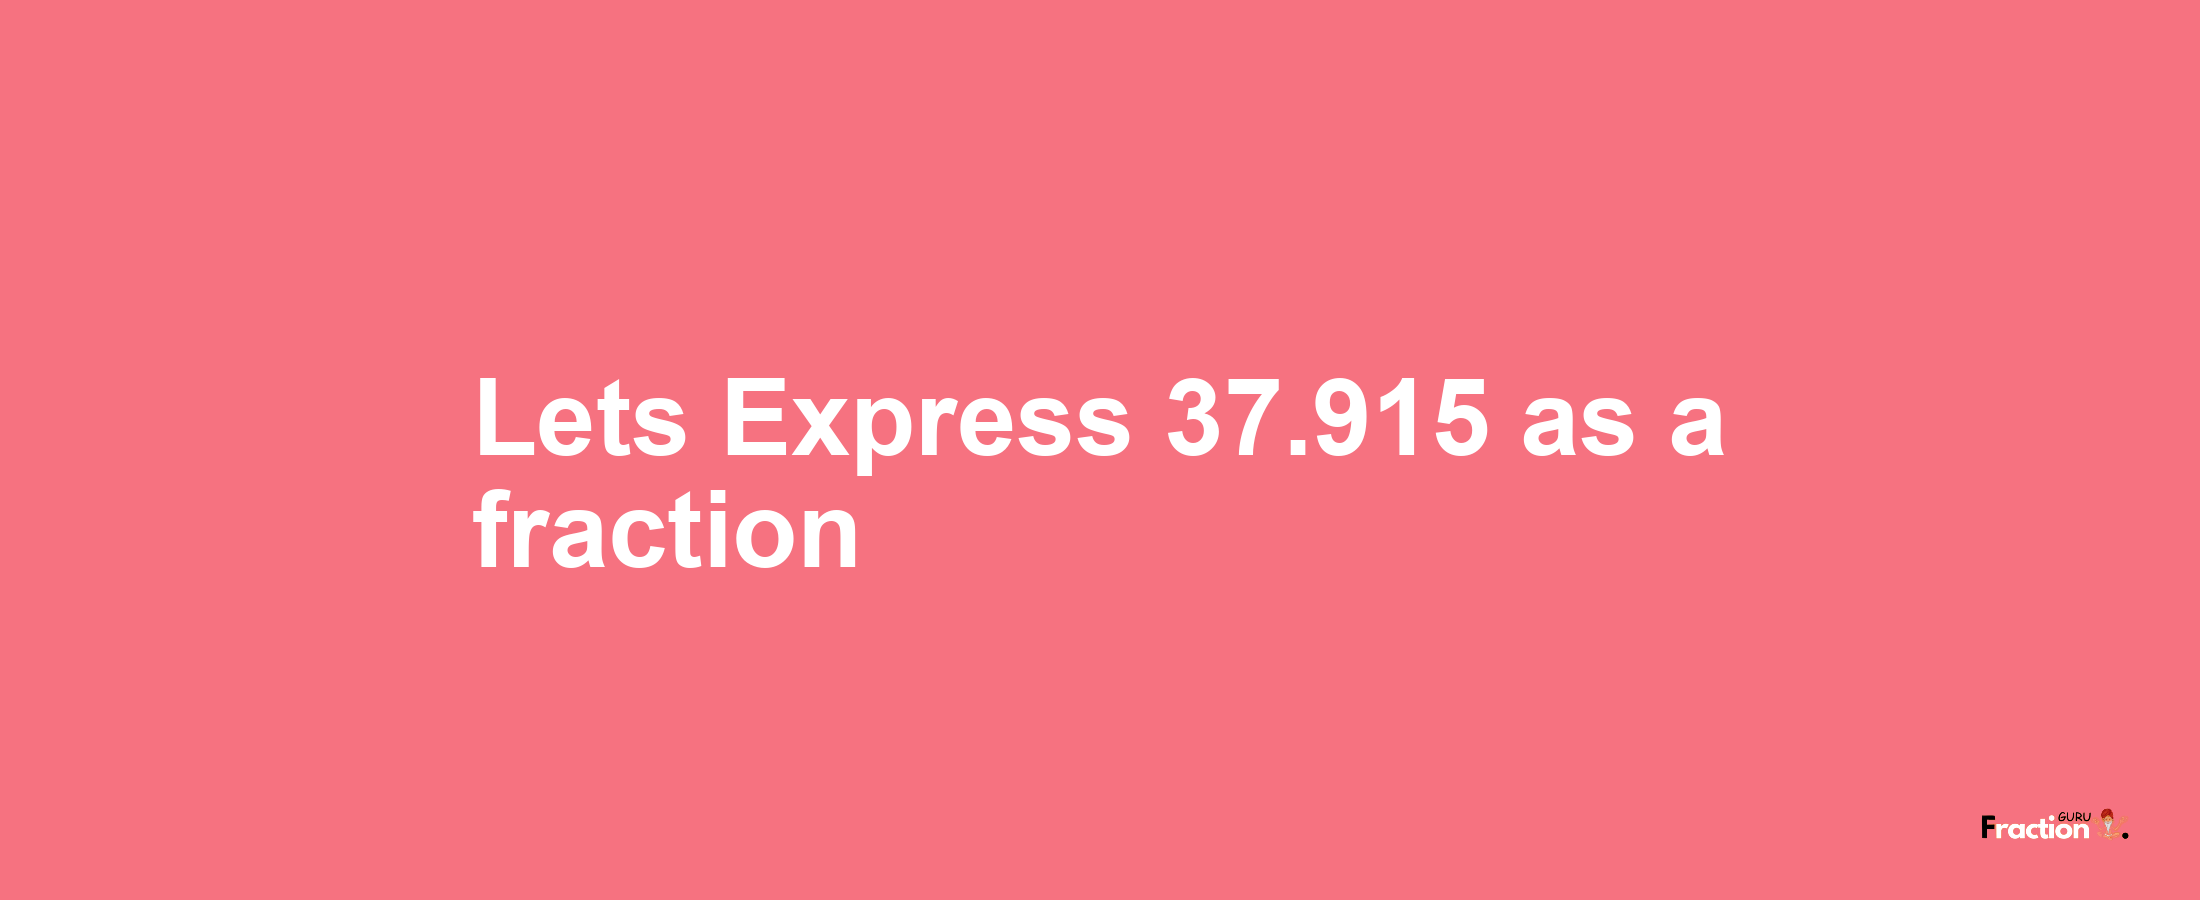 Lets Express 37.915 as afraction